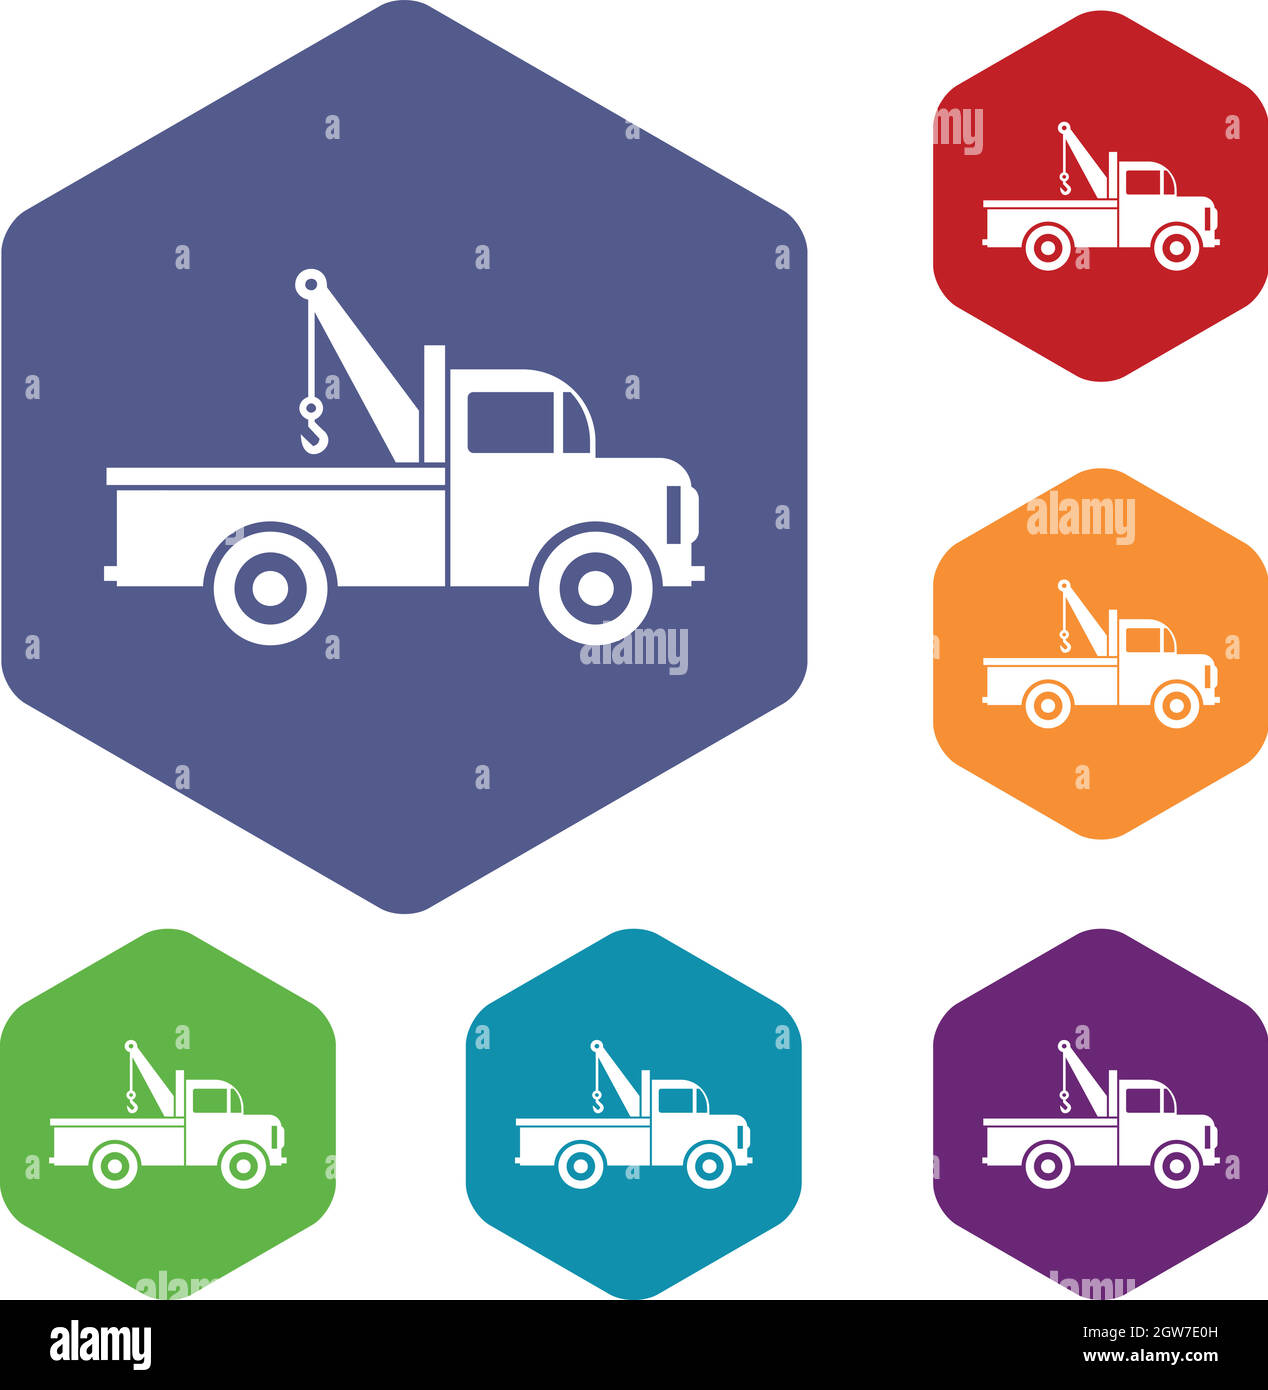 Car towing truck icons set Stock Vector